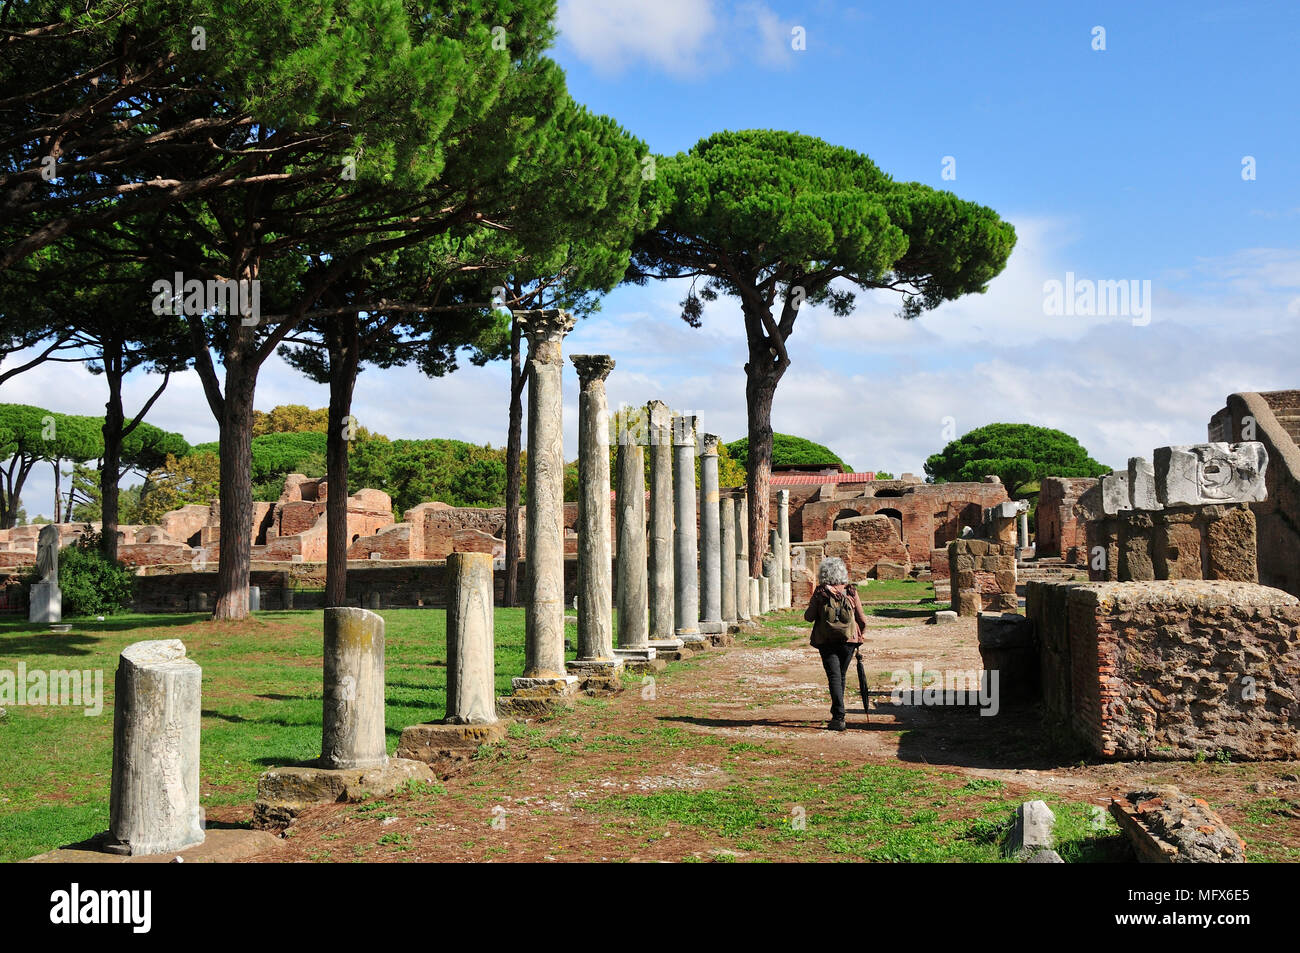 The Market square of Ostia Antica. At the mouth of the River Tiber, Ostia was Rome's seaport two thousand years ago. Italy Stock Photo